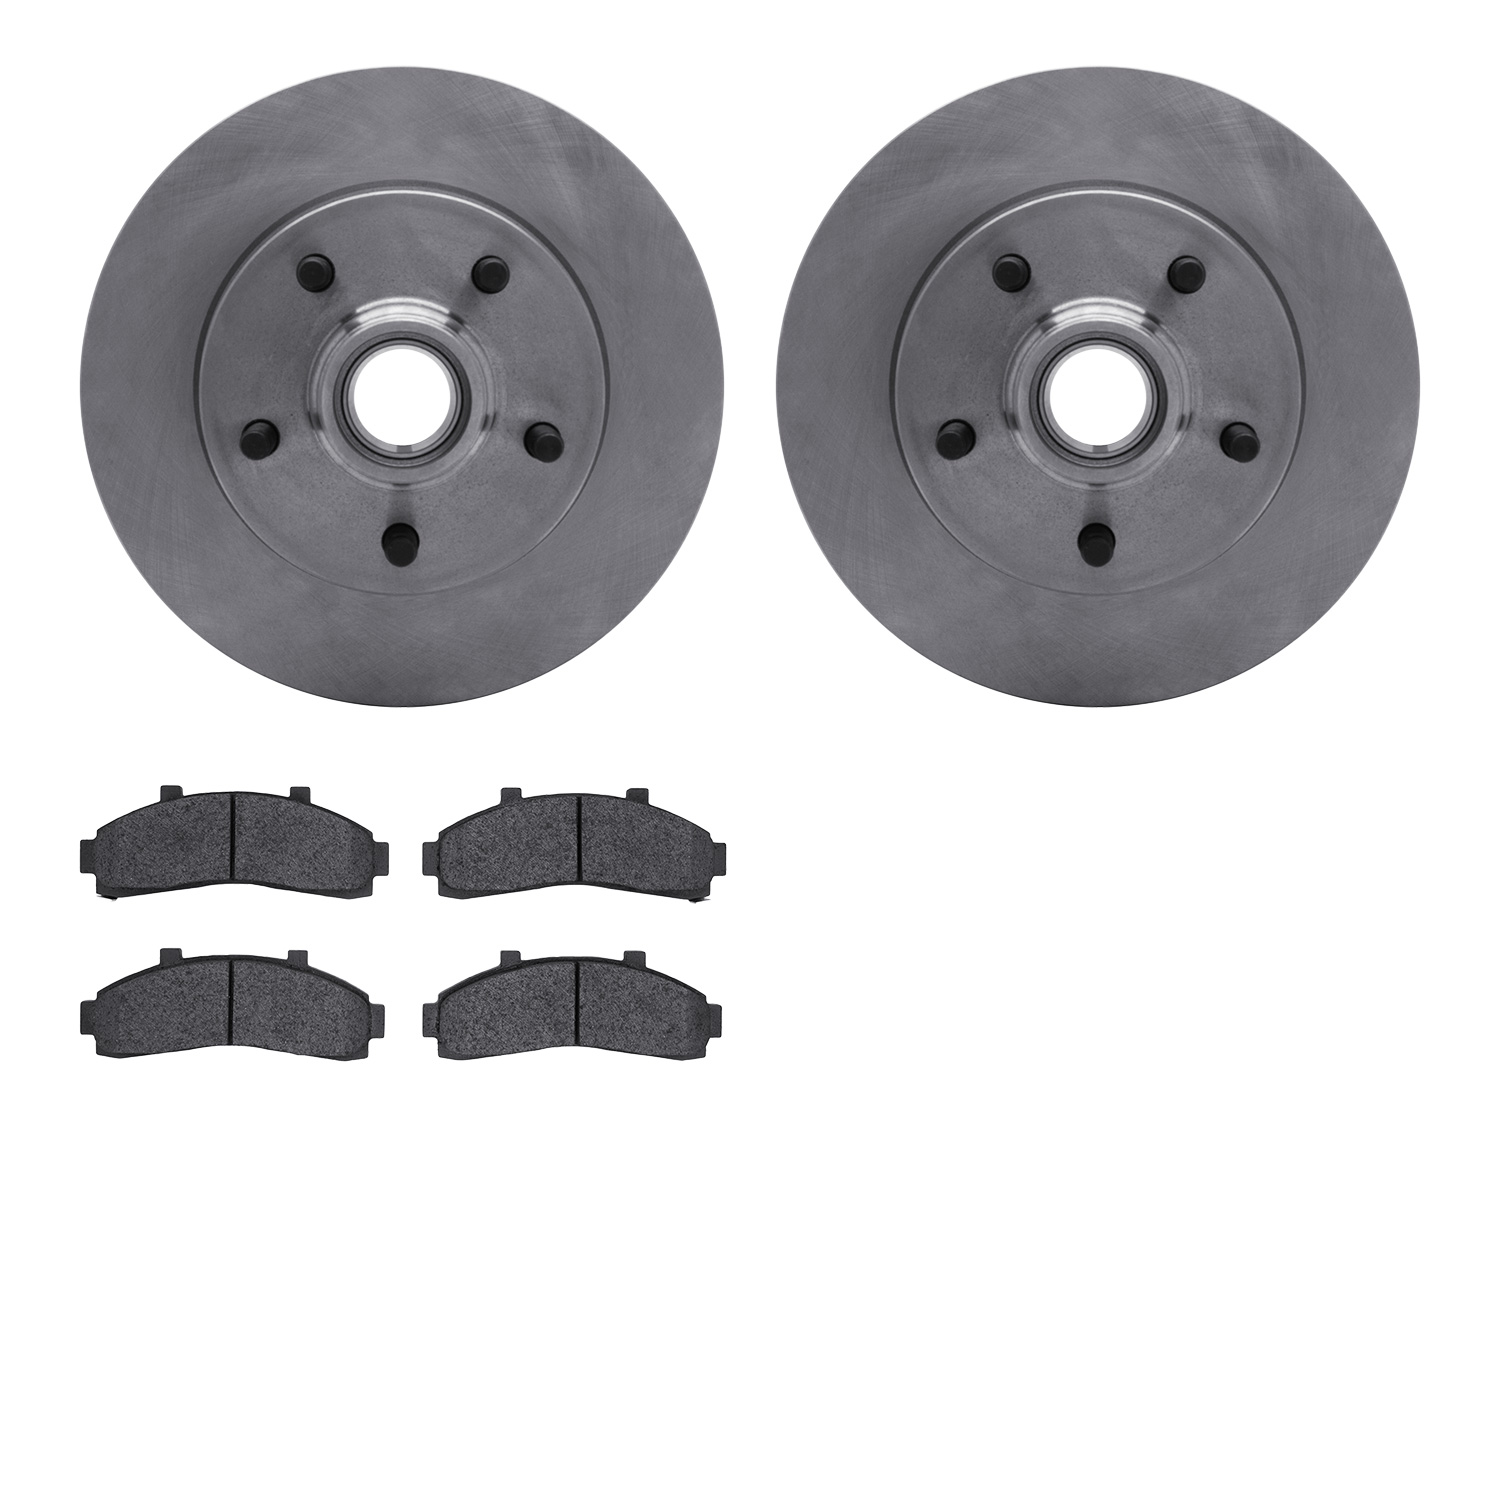 6402-54155 Brake Rotors with Ultimate-Duty Brake Pads, 1998-2002 Ford/Lincoln/Mercury/Mazda, Position: Front